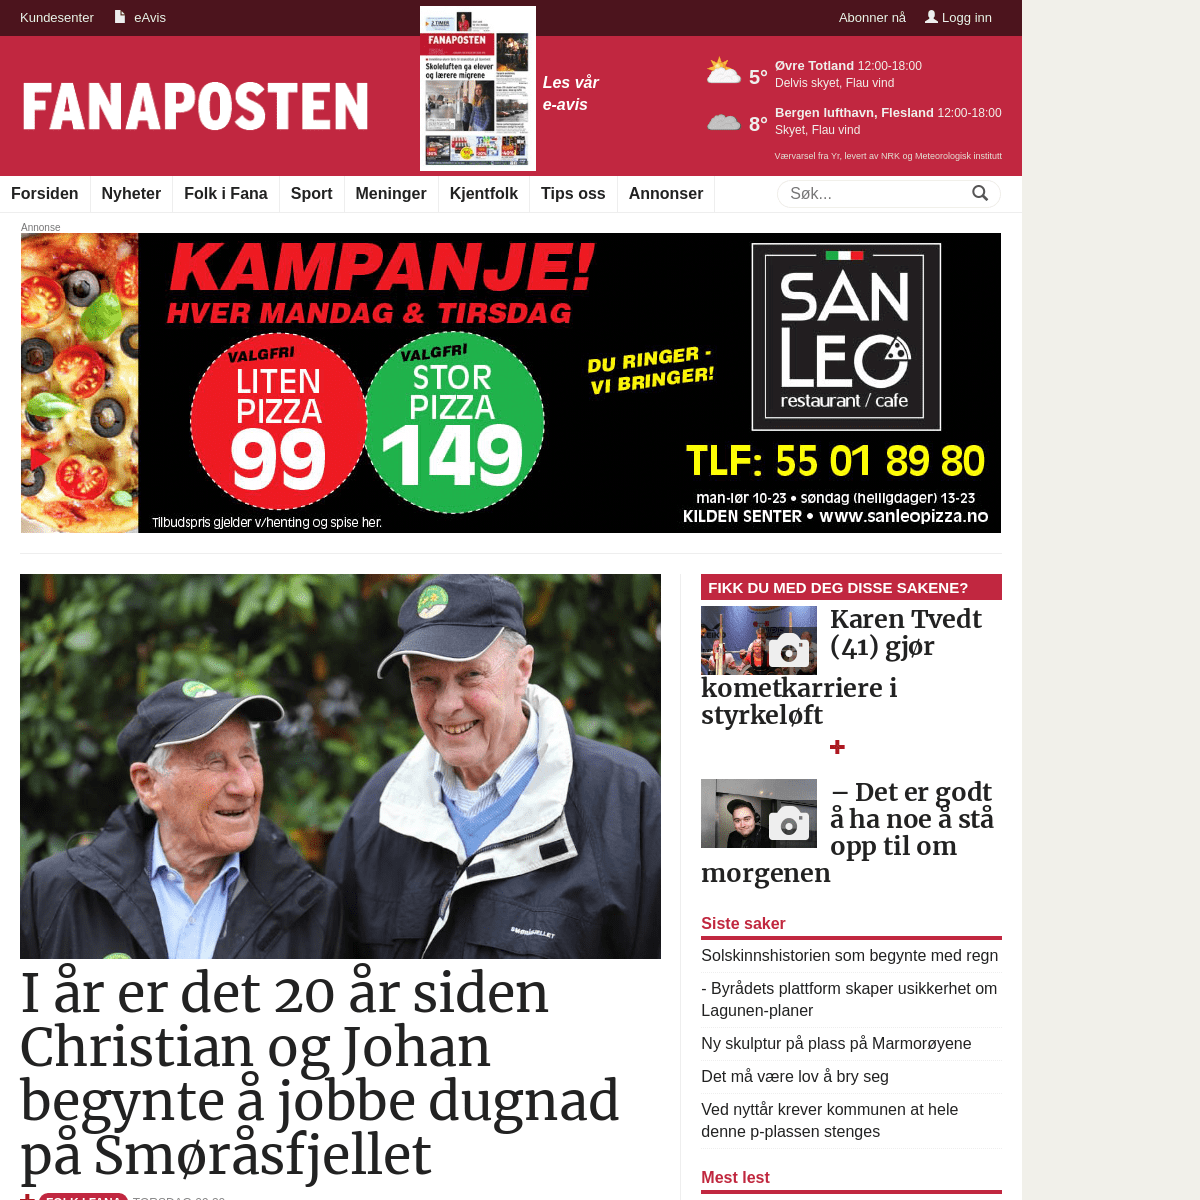 A complete backup of fanaposten.no